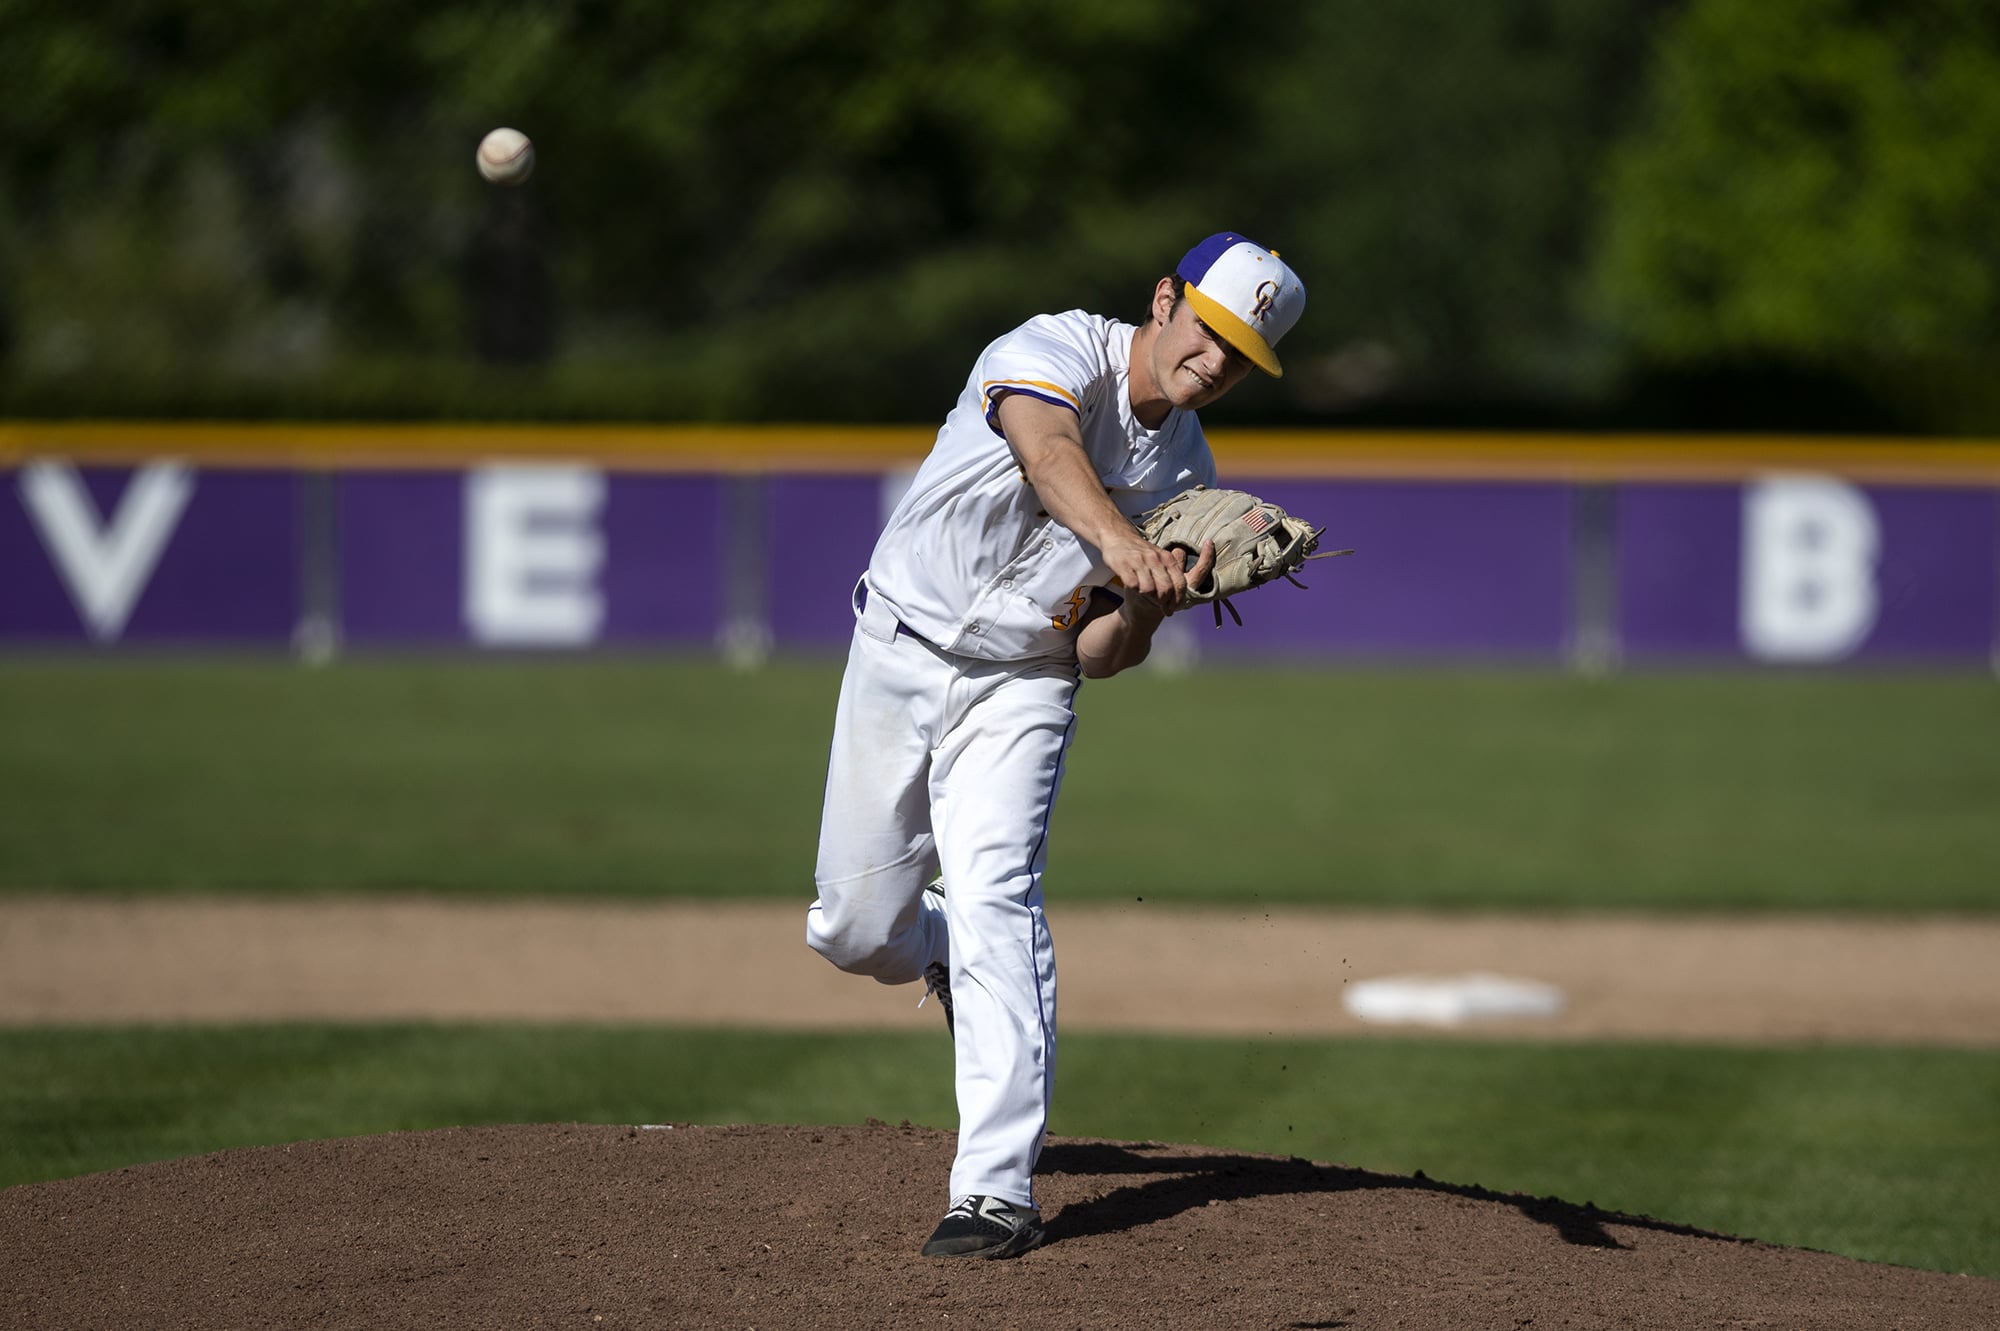 Columbia River's Nick Alder (5) pitches during the game against Centralia in the first round of the 2A district baseball tournament at Columbia River High School in Vancouver on Tuesday May 7, 2019.